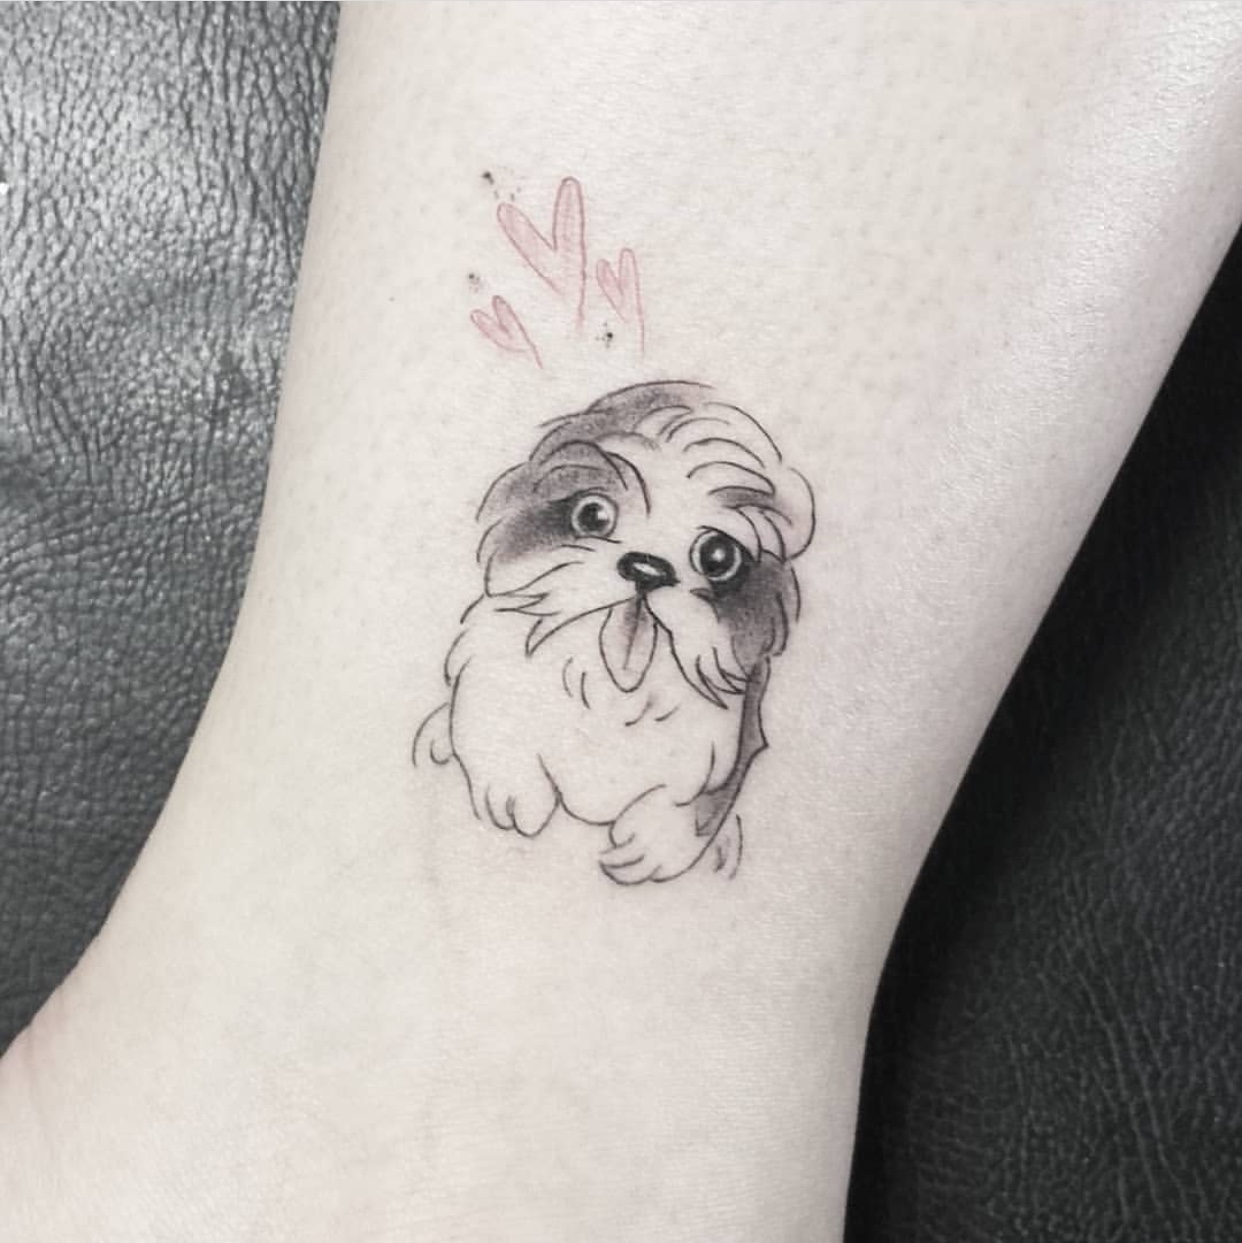 Shih Tzu sticking its tongue out with hearts above its head tattoo on the ankle